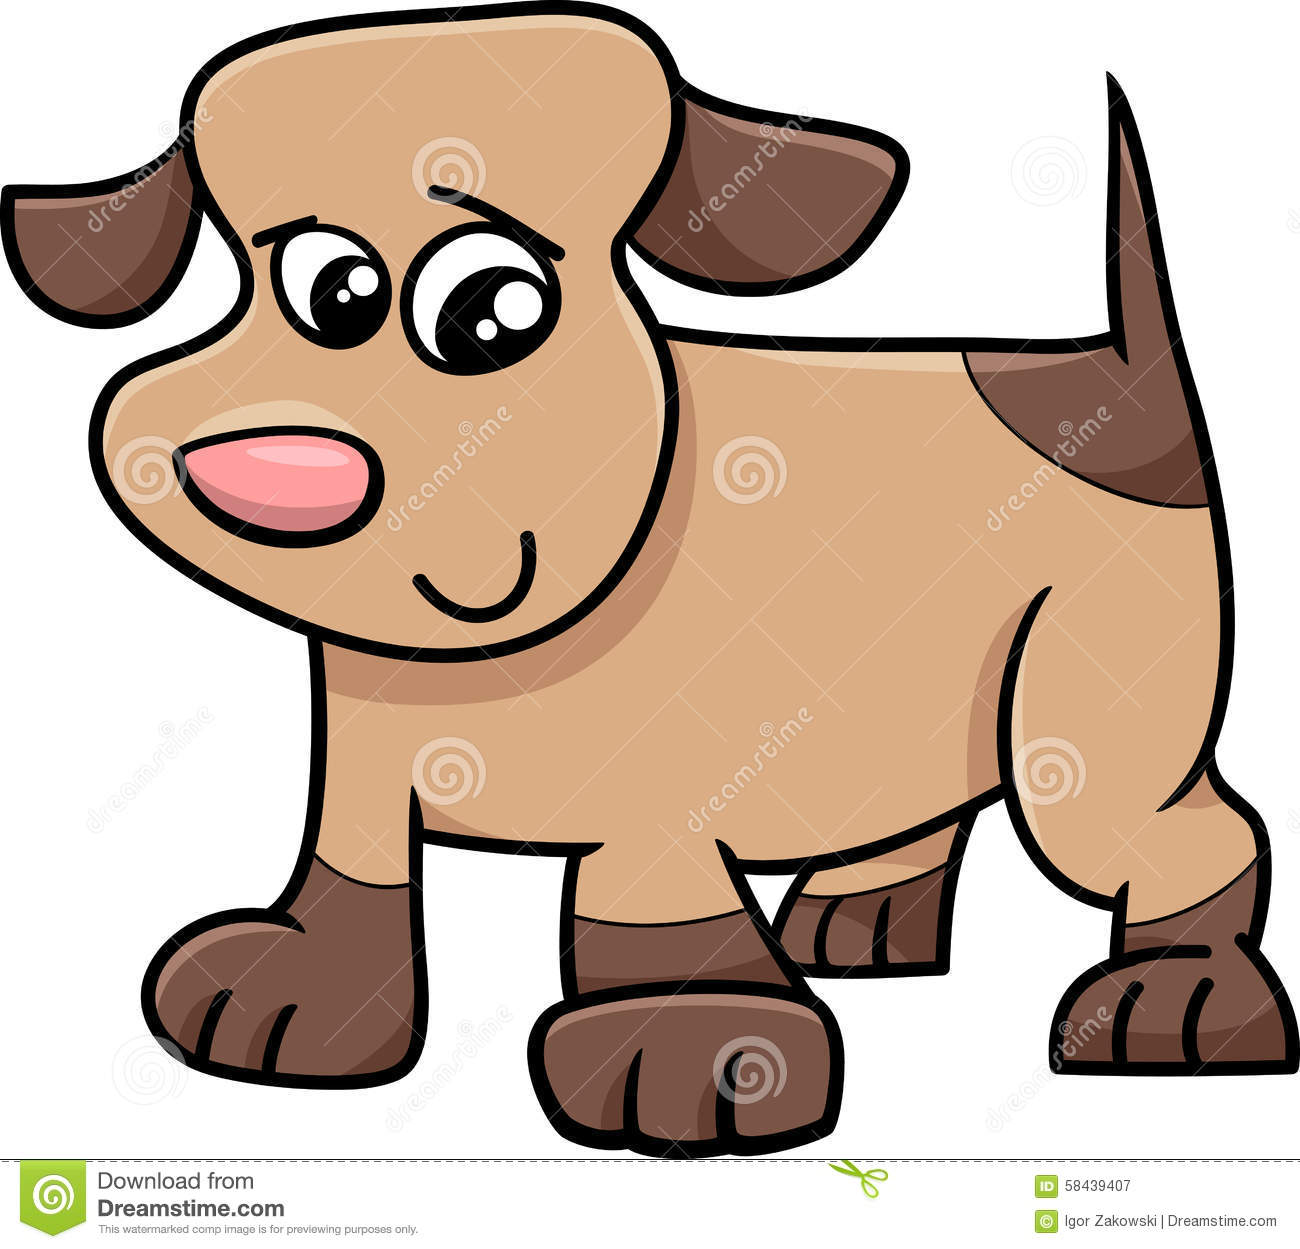 Cartoon Illustration Of Cute Little Spotted Dog Or Puppy